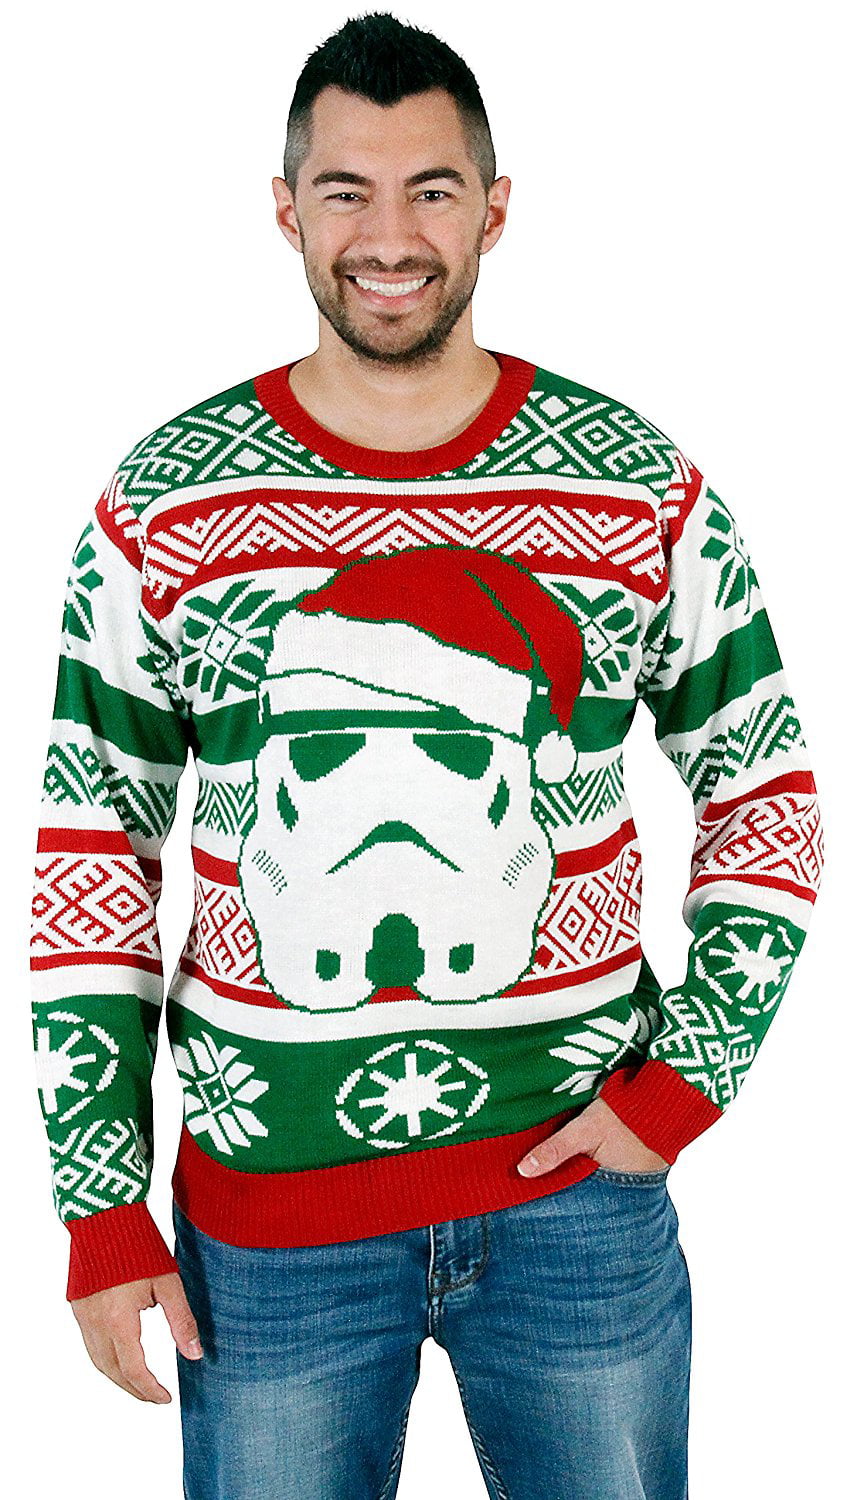 Star Wars Stormtroopers Ugly Christmas Sweater Men Women Holiday Sweater